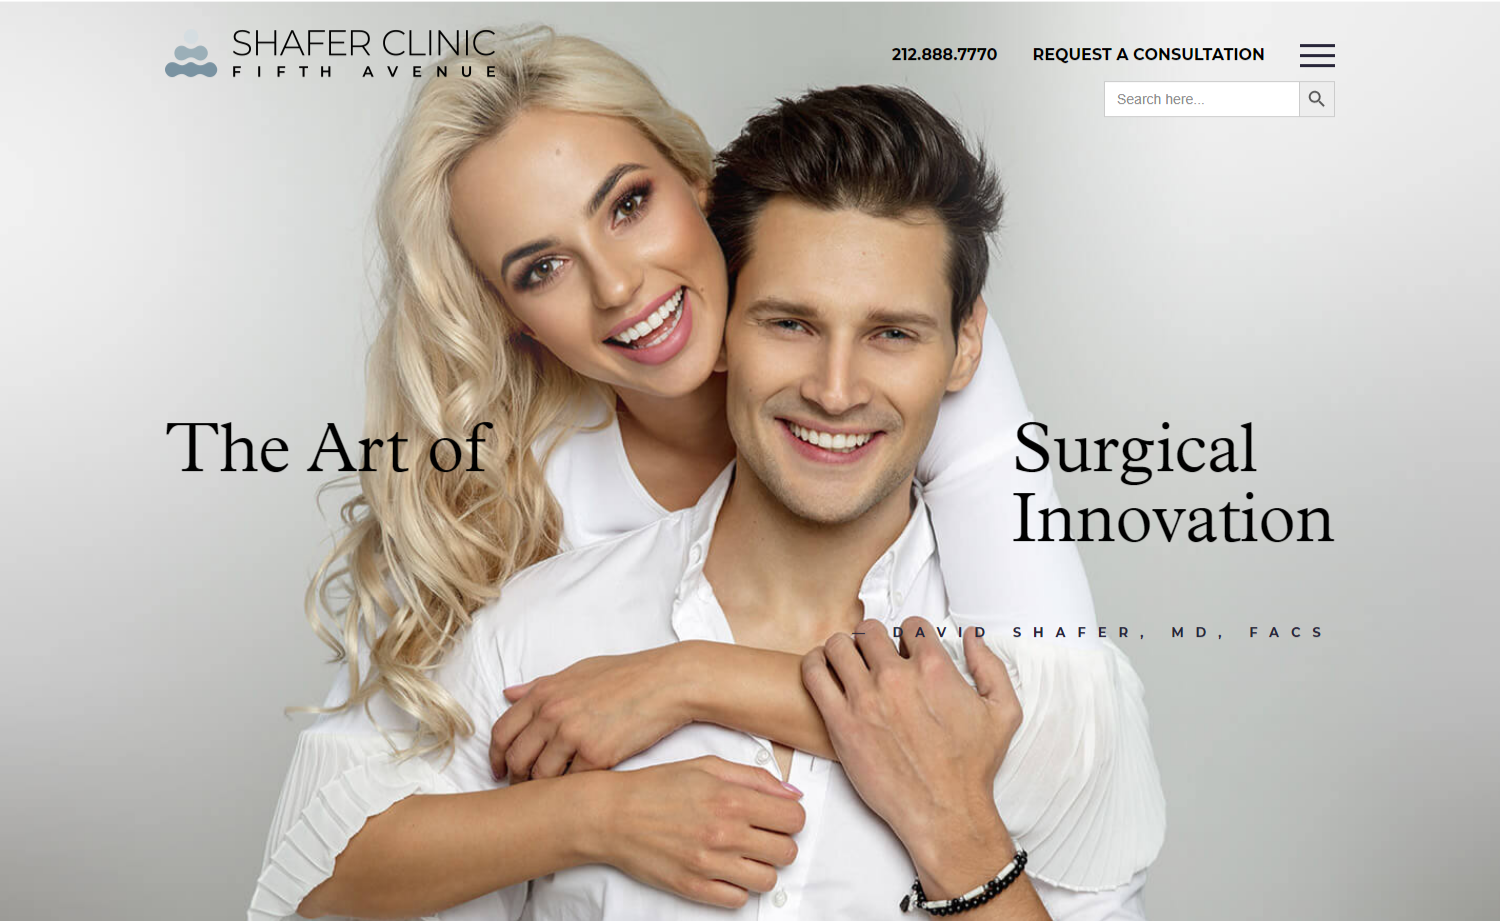 Shafer Clinic Fifth Avenue